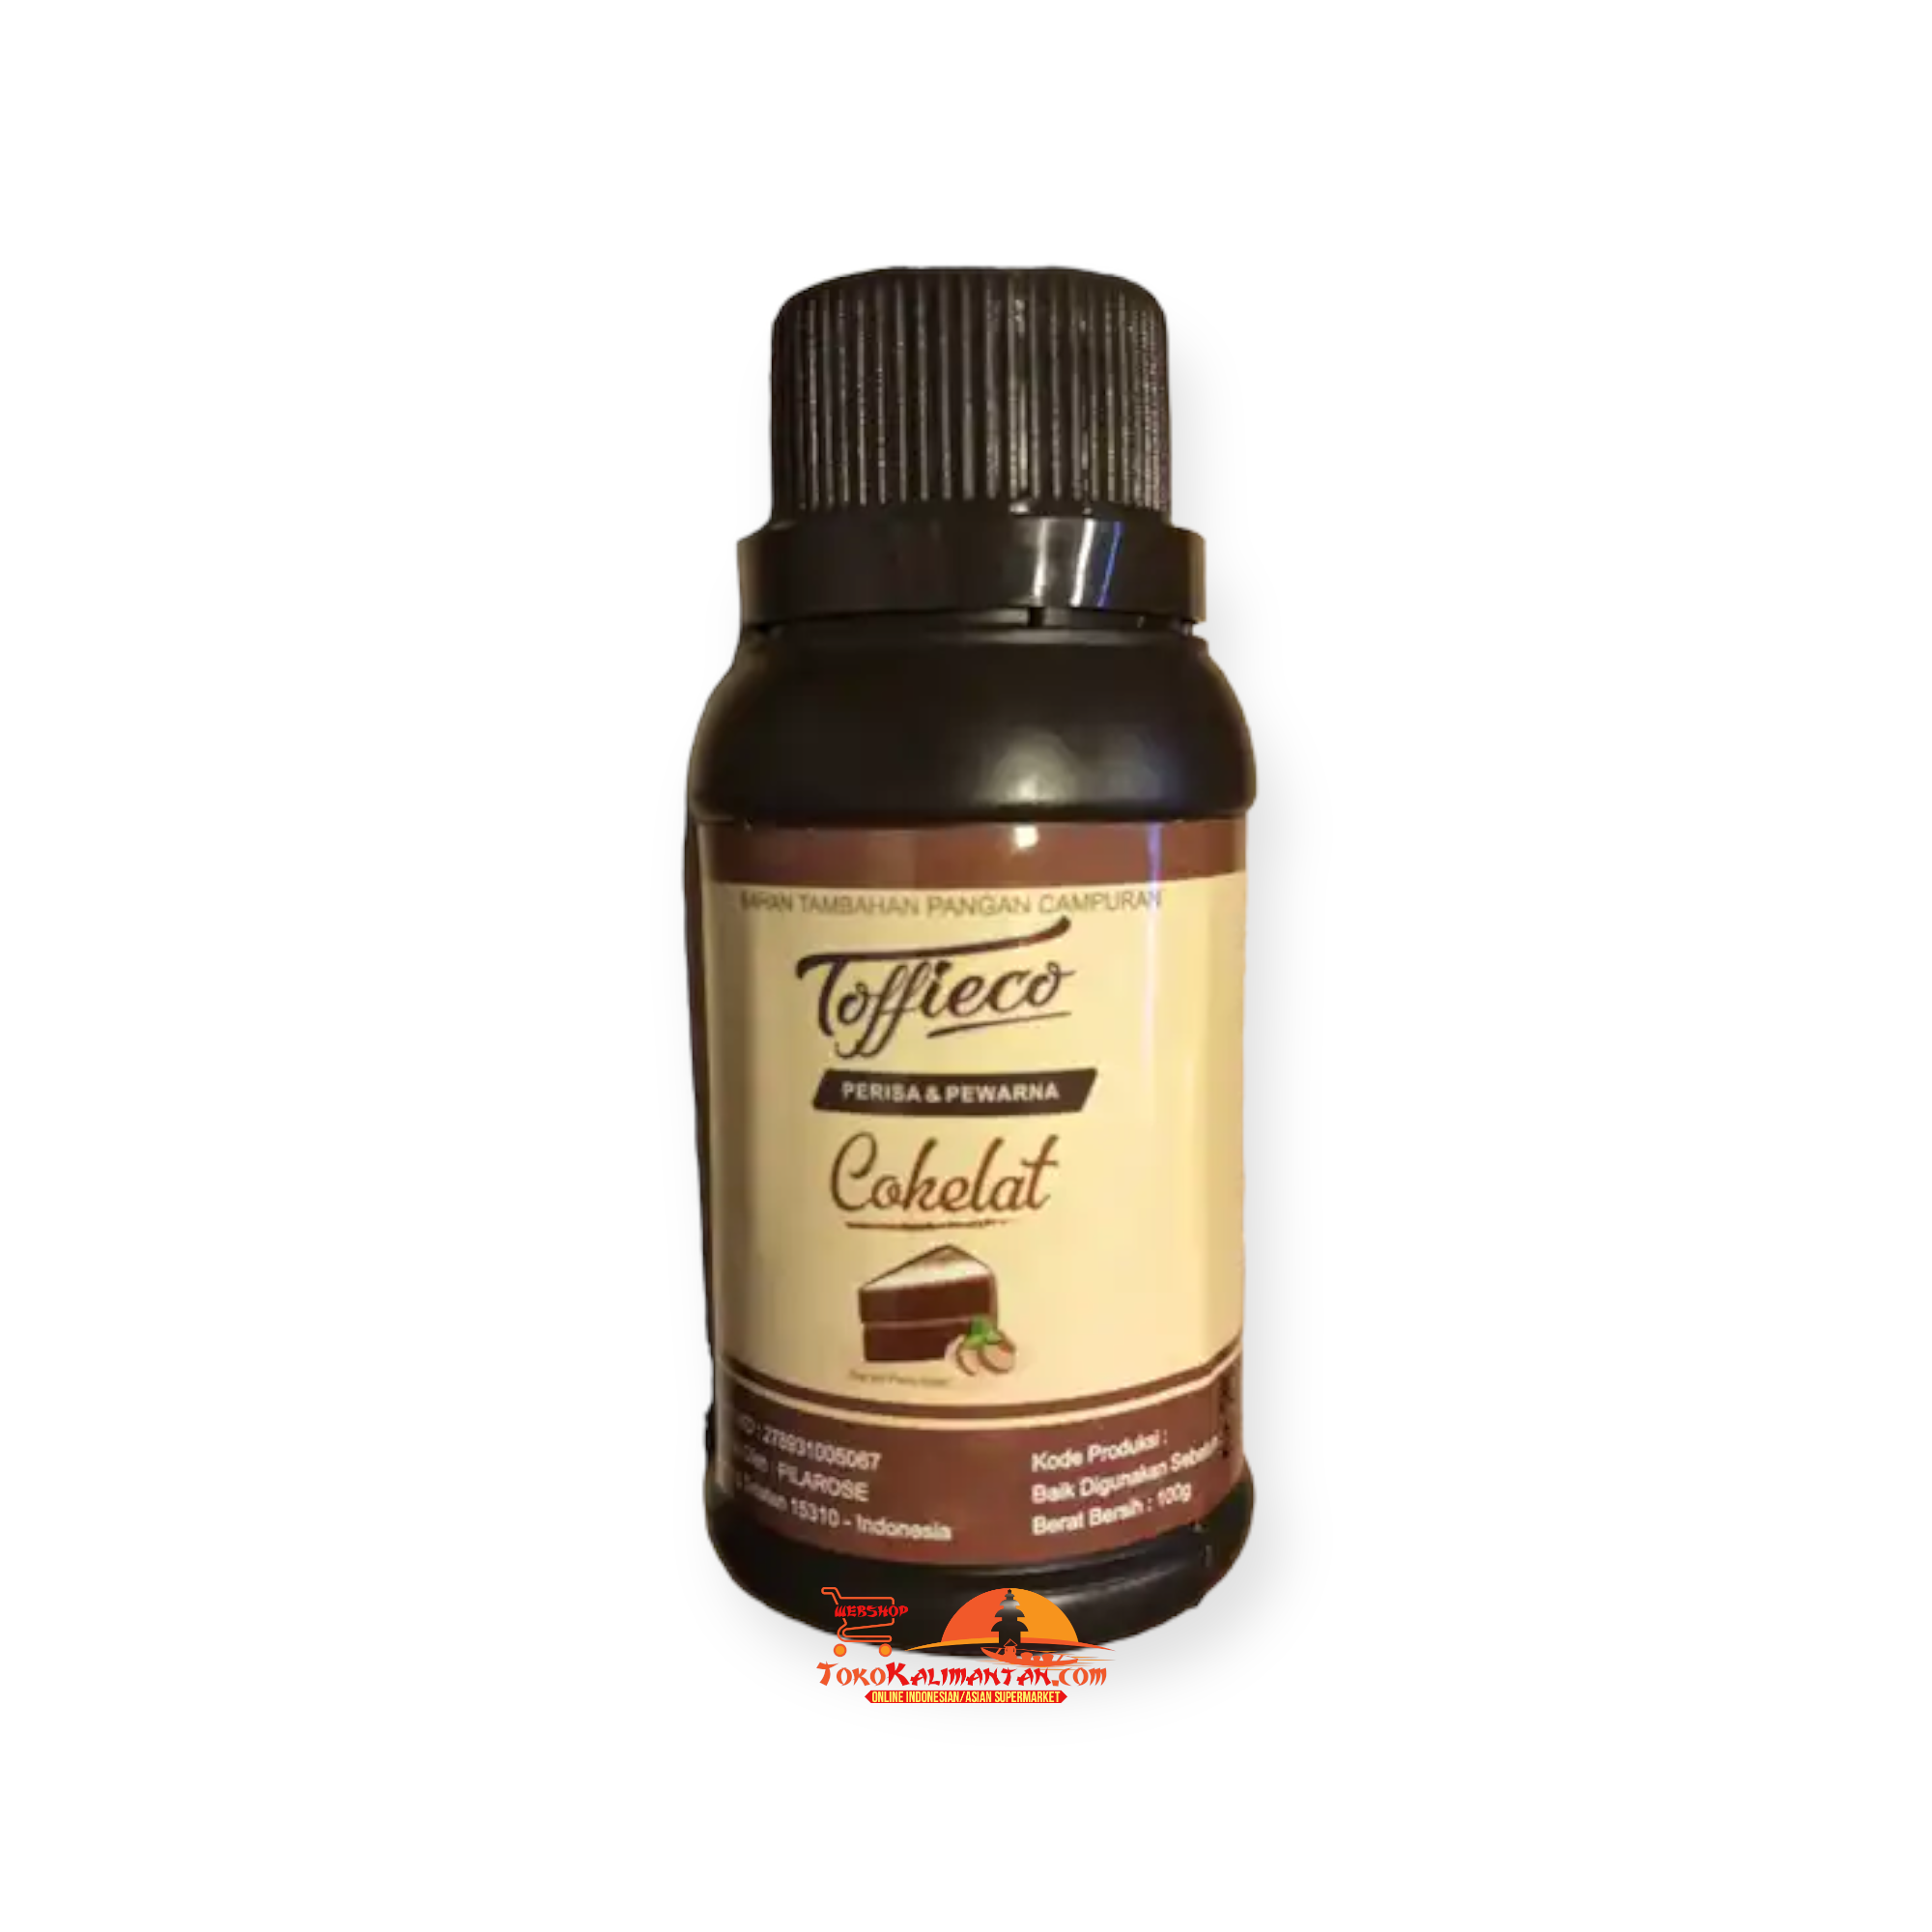 Toffieco Toffieco - Cokelat